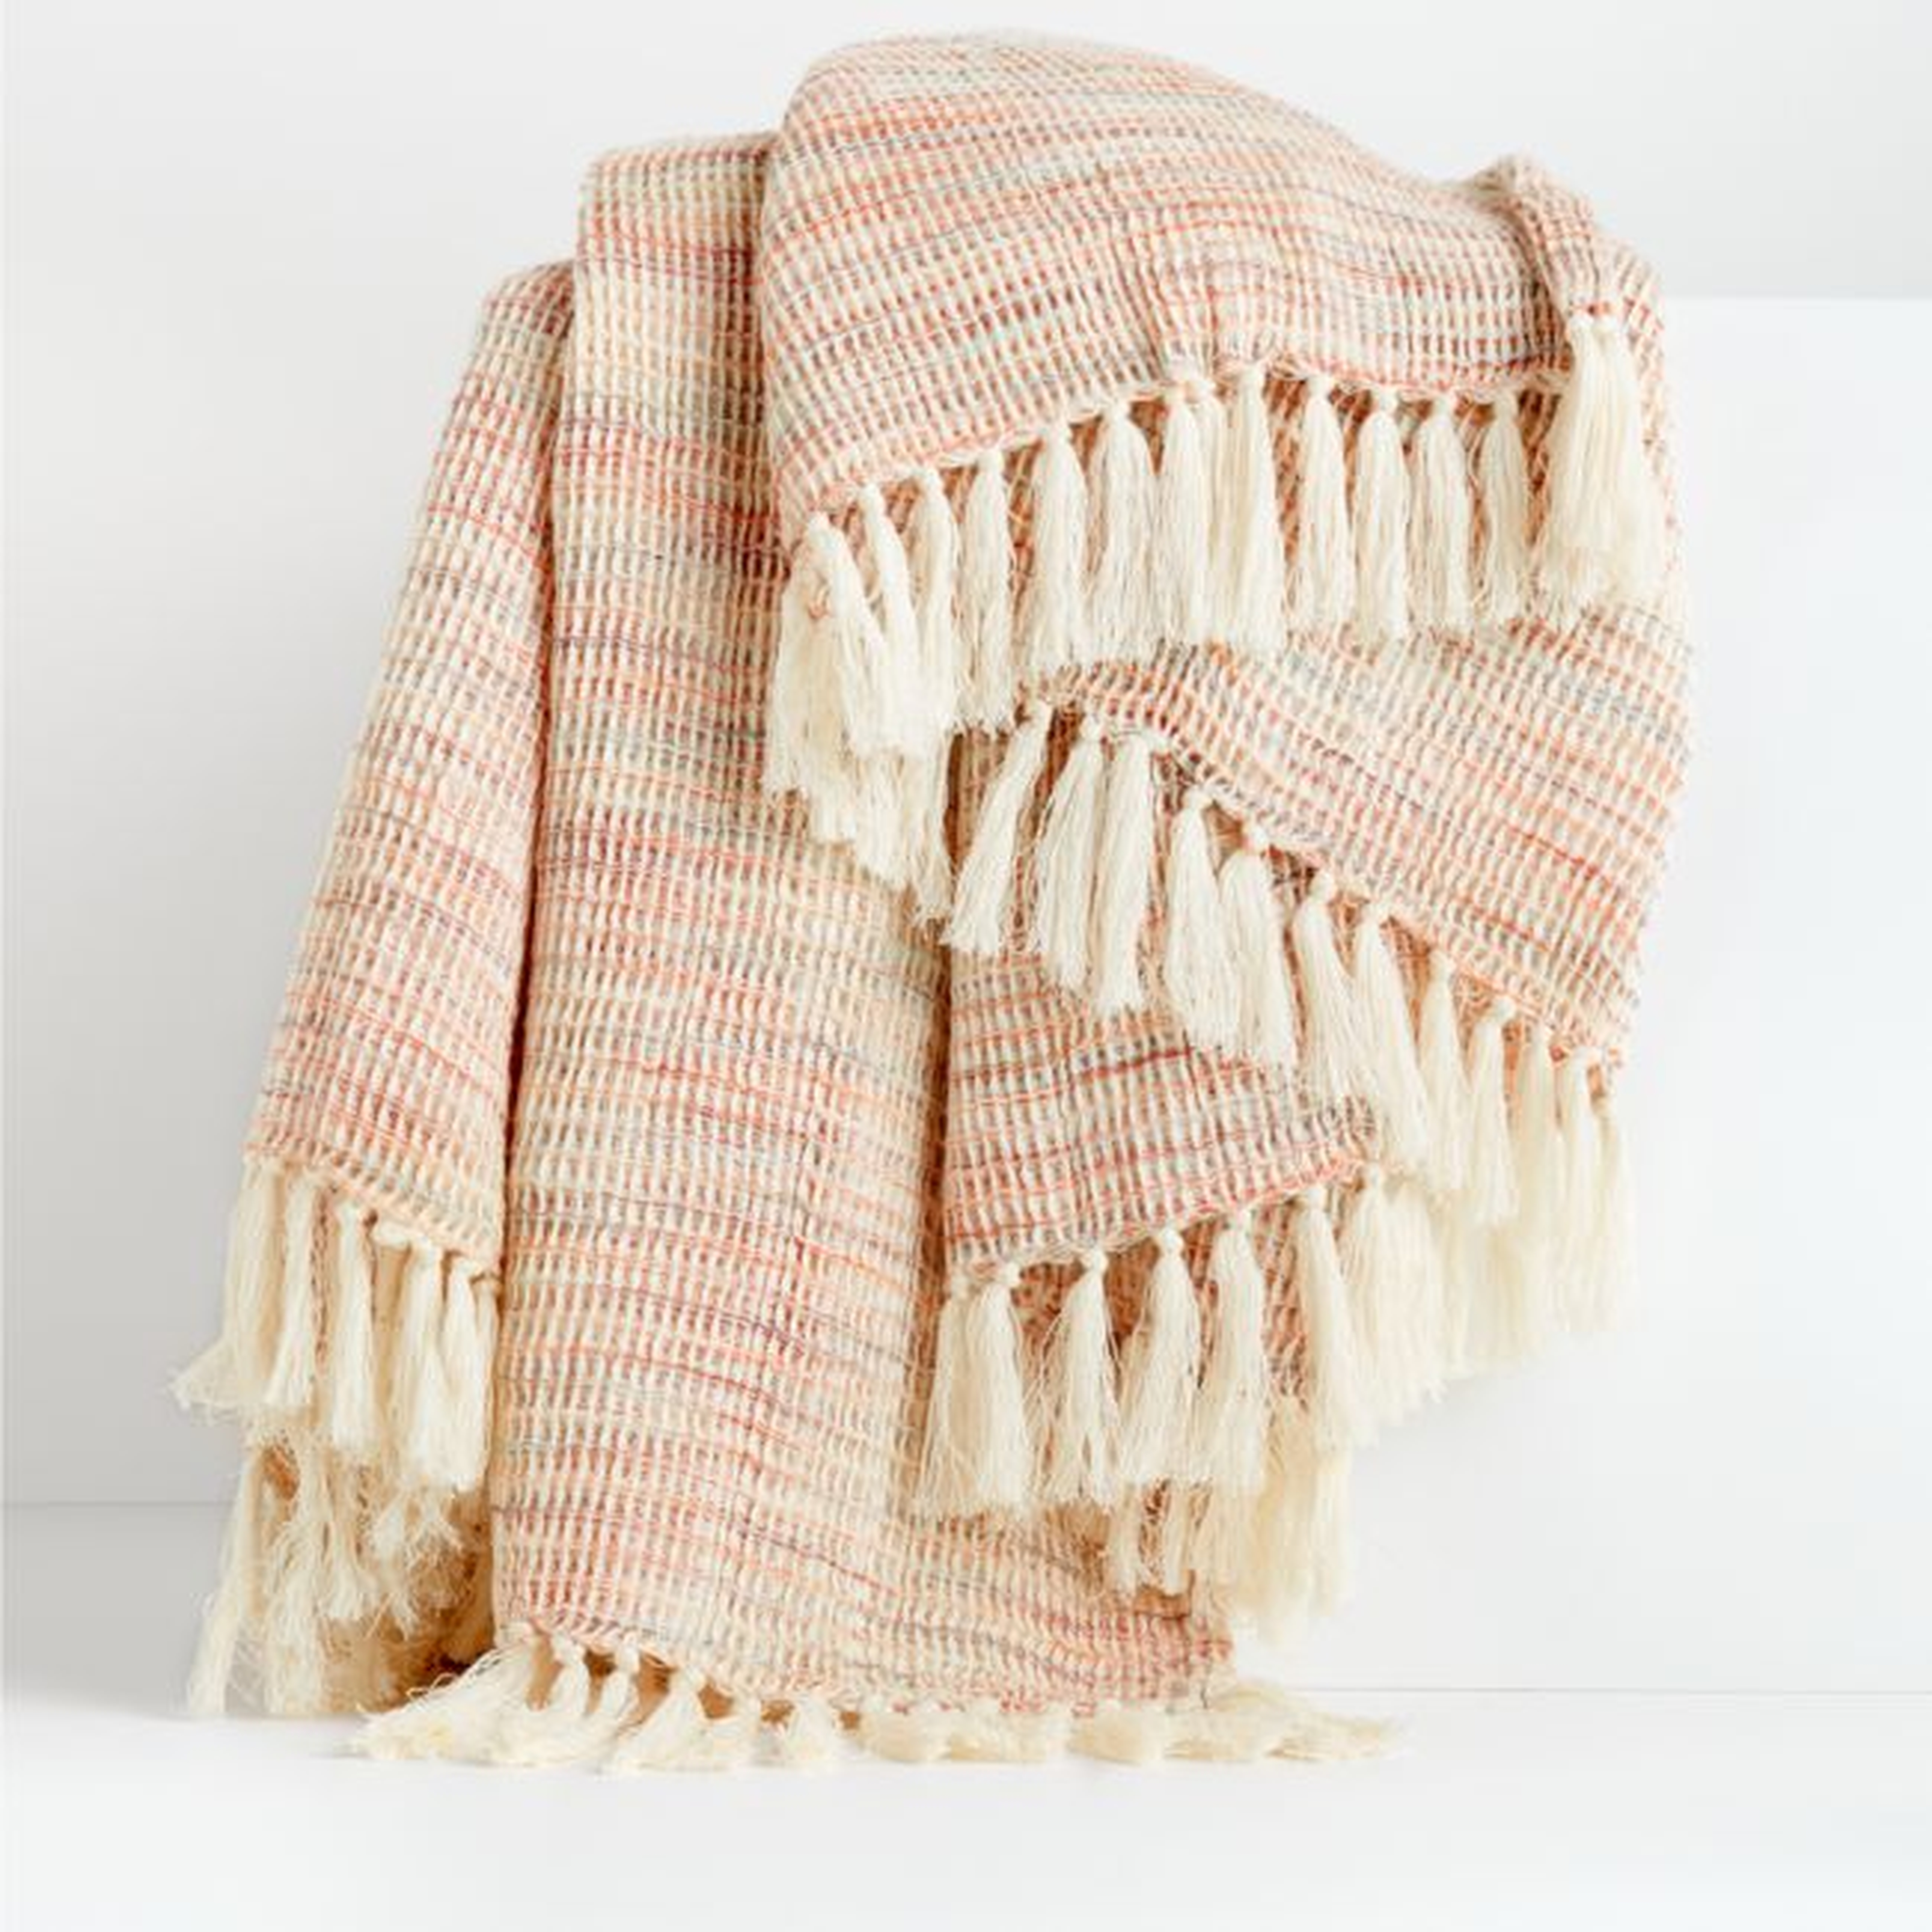 Cyril Waffle Weave Throw Blanket, 40" x 70" - Crate and Barrel